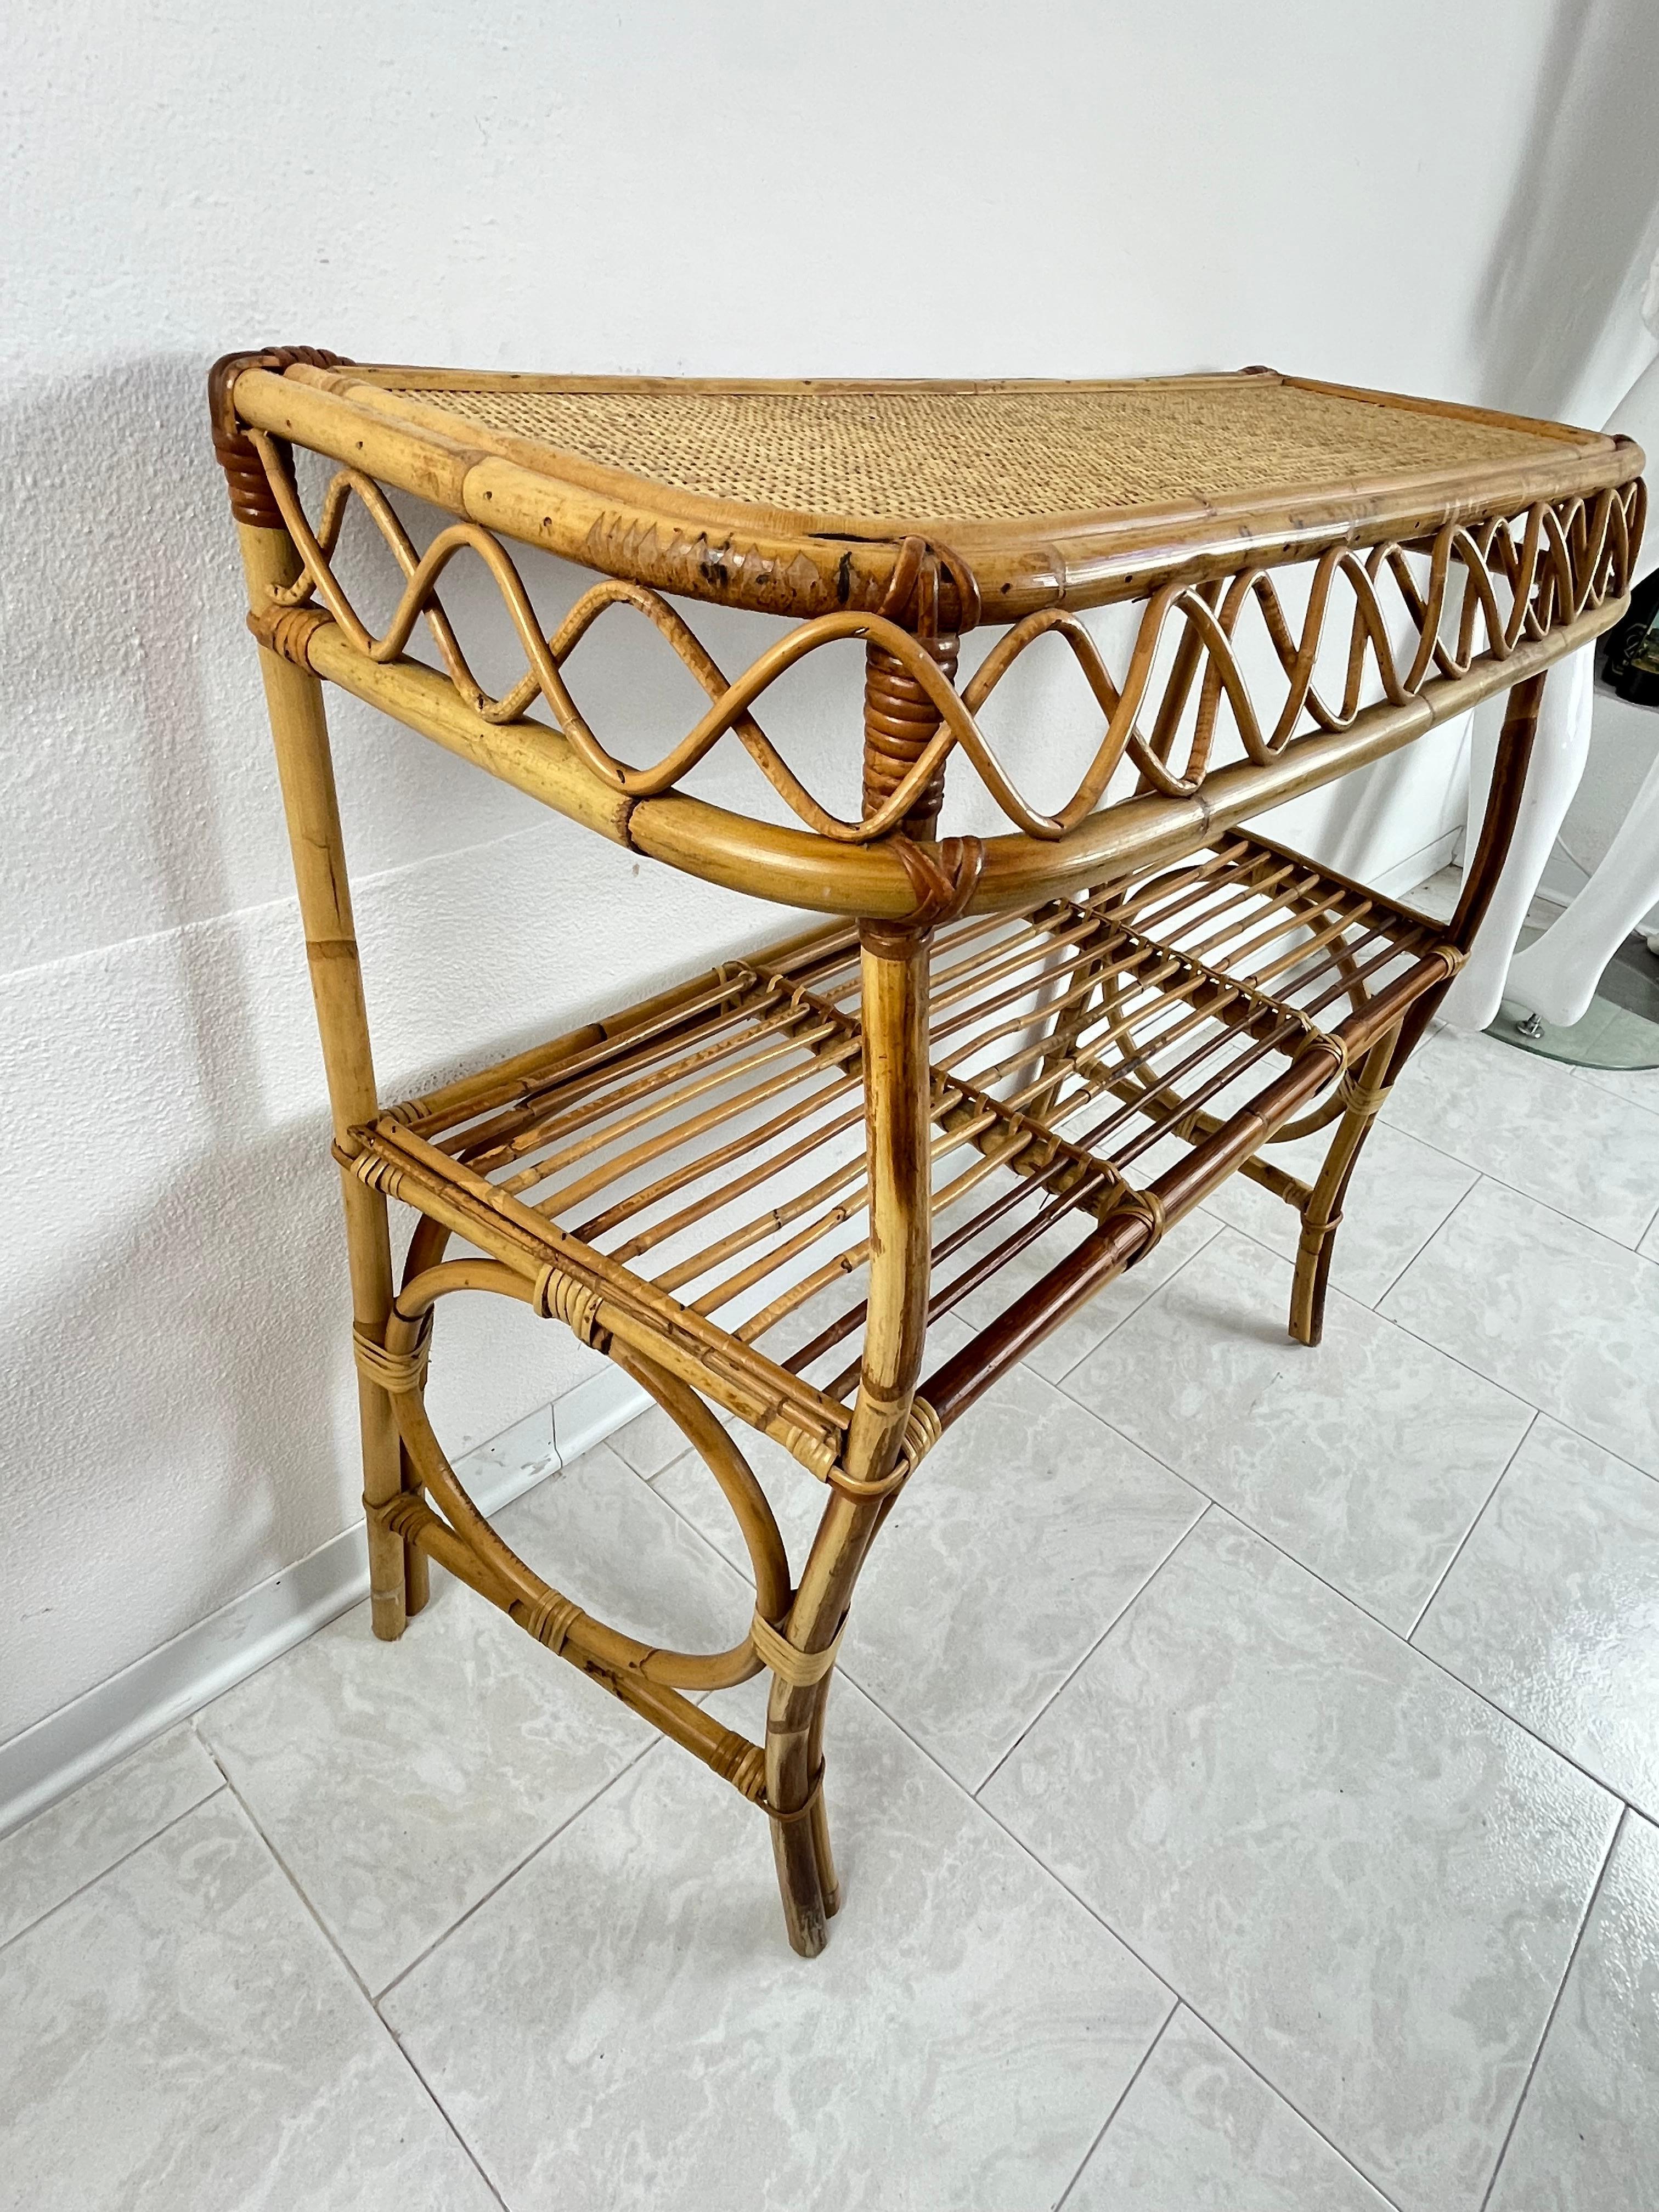 Mid-Century Wicker and Bamboo Console Attributed to Franco Albini 1960s For Sale 4